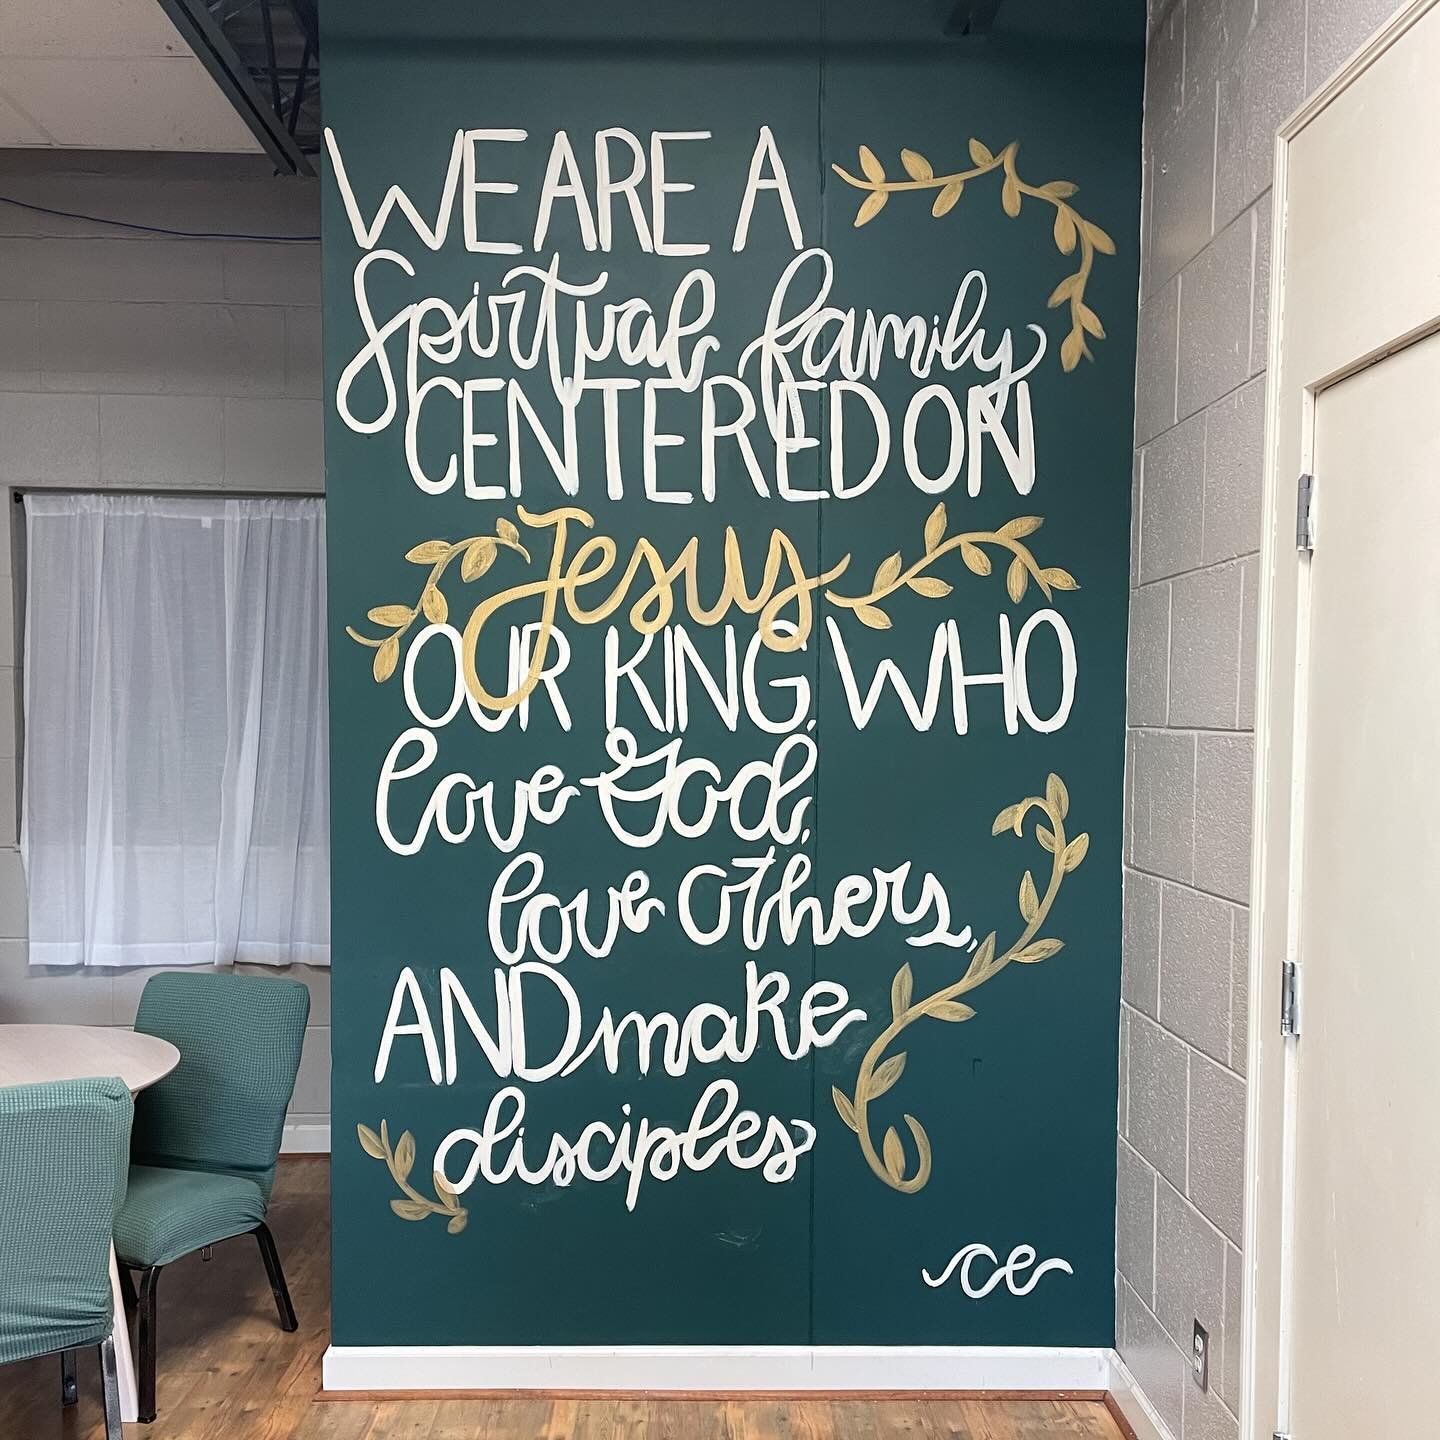 &ldquo;We are a spiritual family, centered on Jesus our King, who love God, love others, and make disciples.&rdquo; 

Thank you SO much @carolineewingg for bringing our mission statement to life with this beautiful mural! 

We kicked off a new series